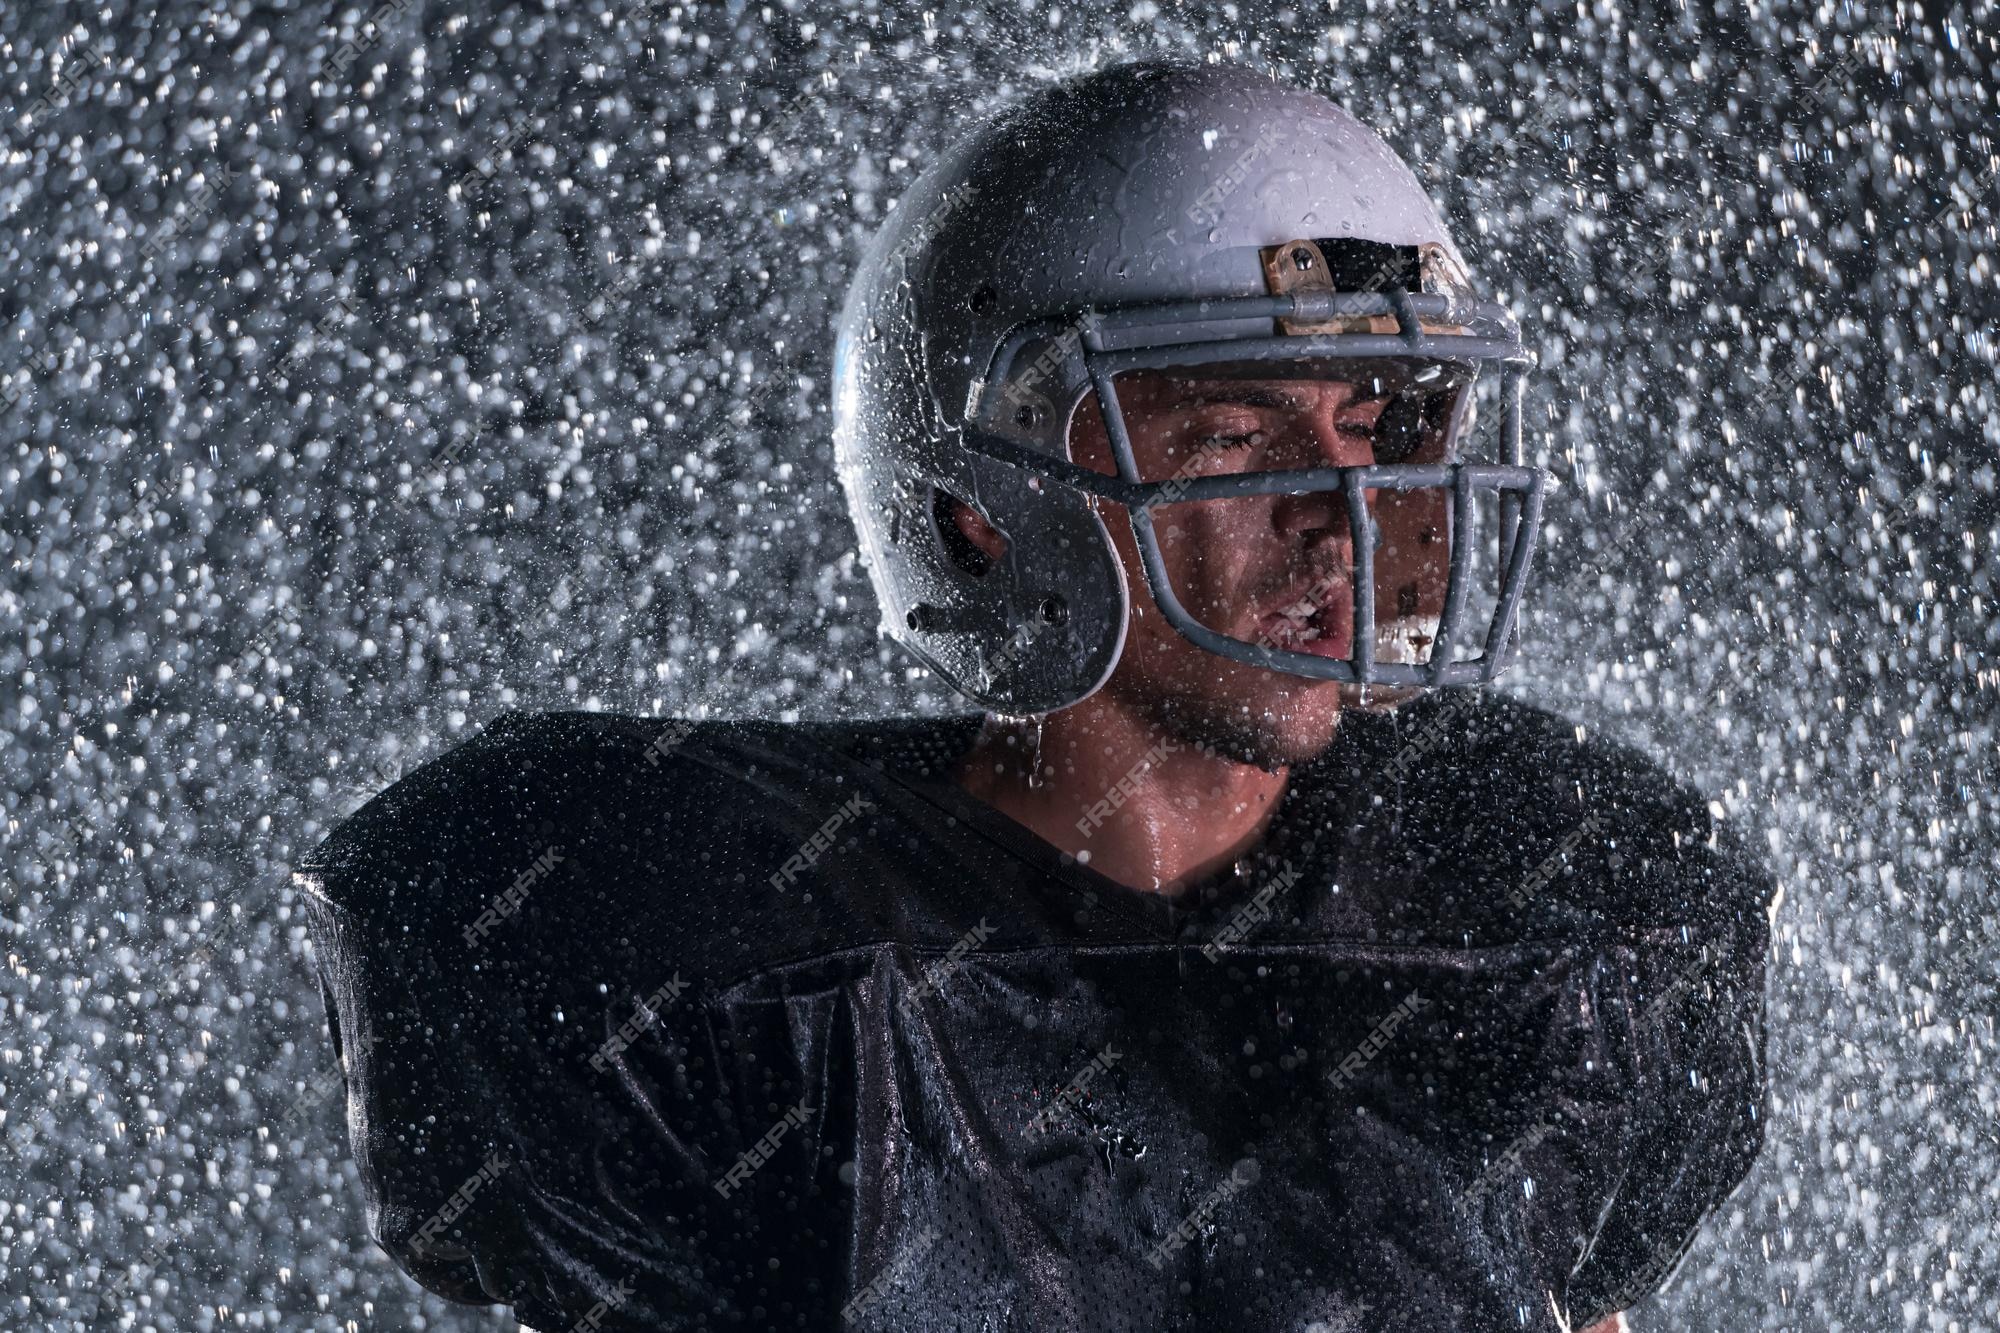 Premium Photo  American football athlete warrior standing on a field holds  his helmet and ready to play. player preparing to run, attack and score  touchdown. rainy night with dramatic lens flare